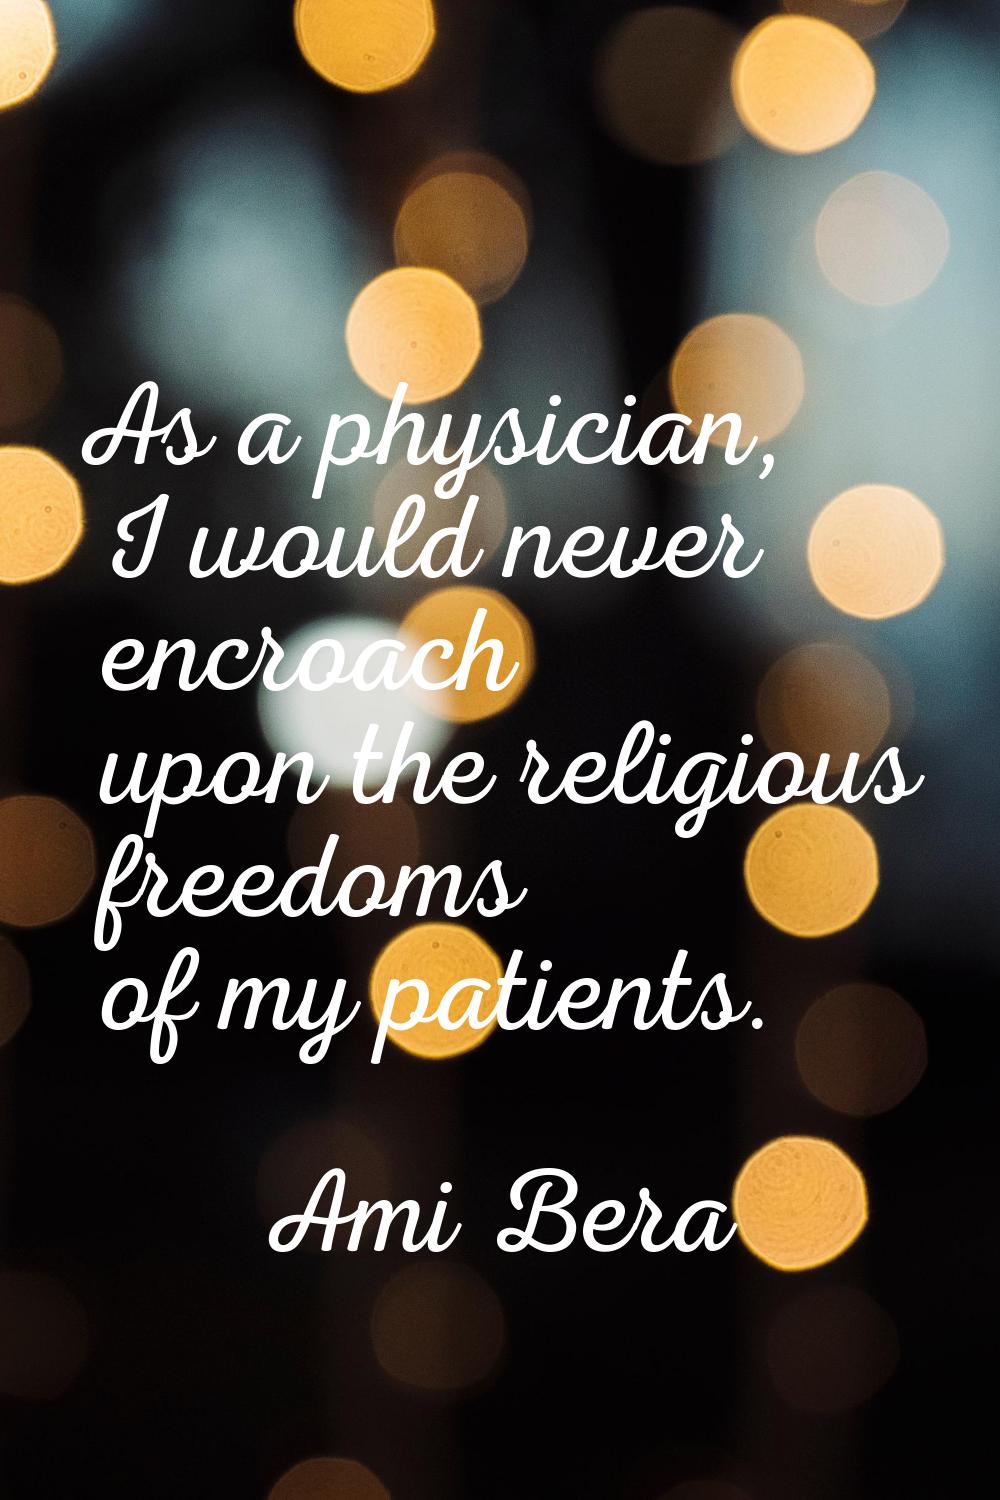 As a physician, I would never encroach upon the religious freedoms of my patients.